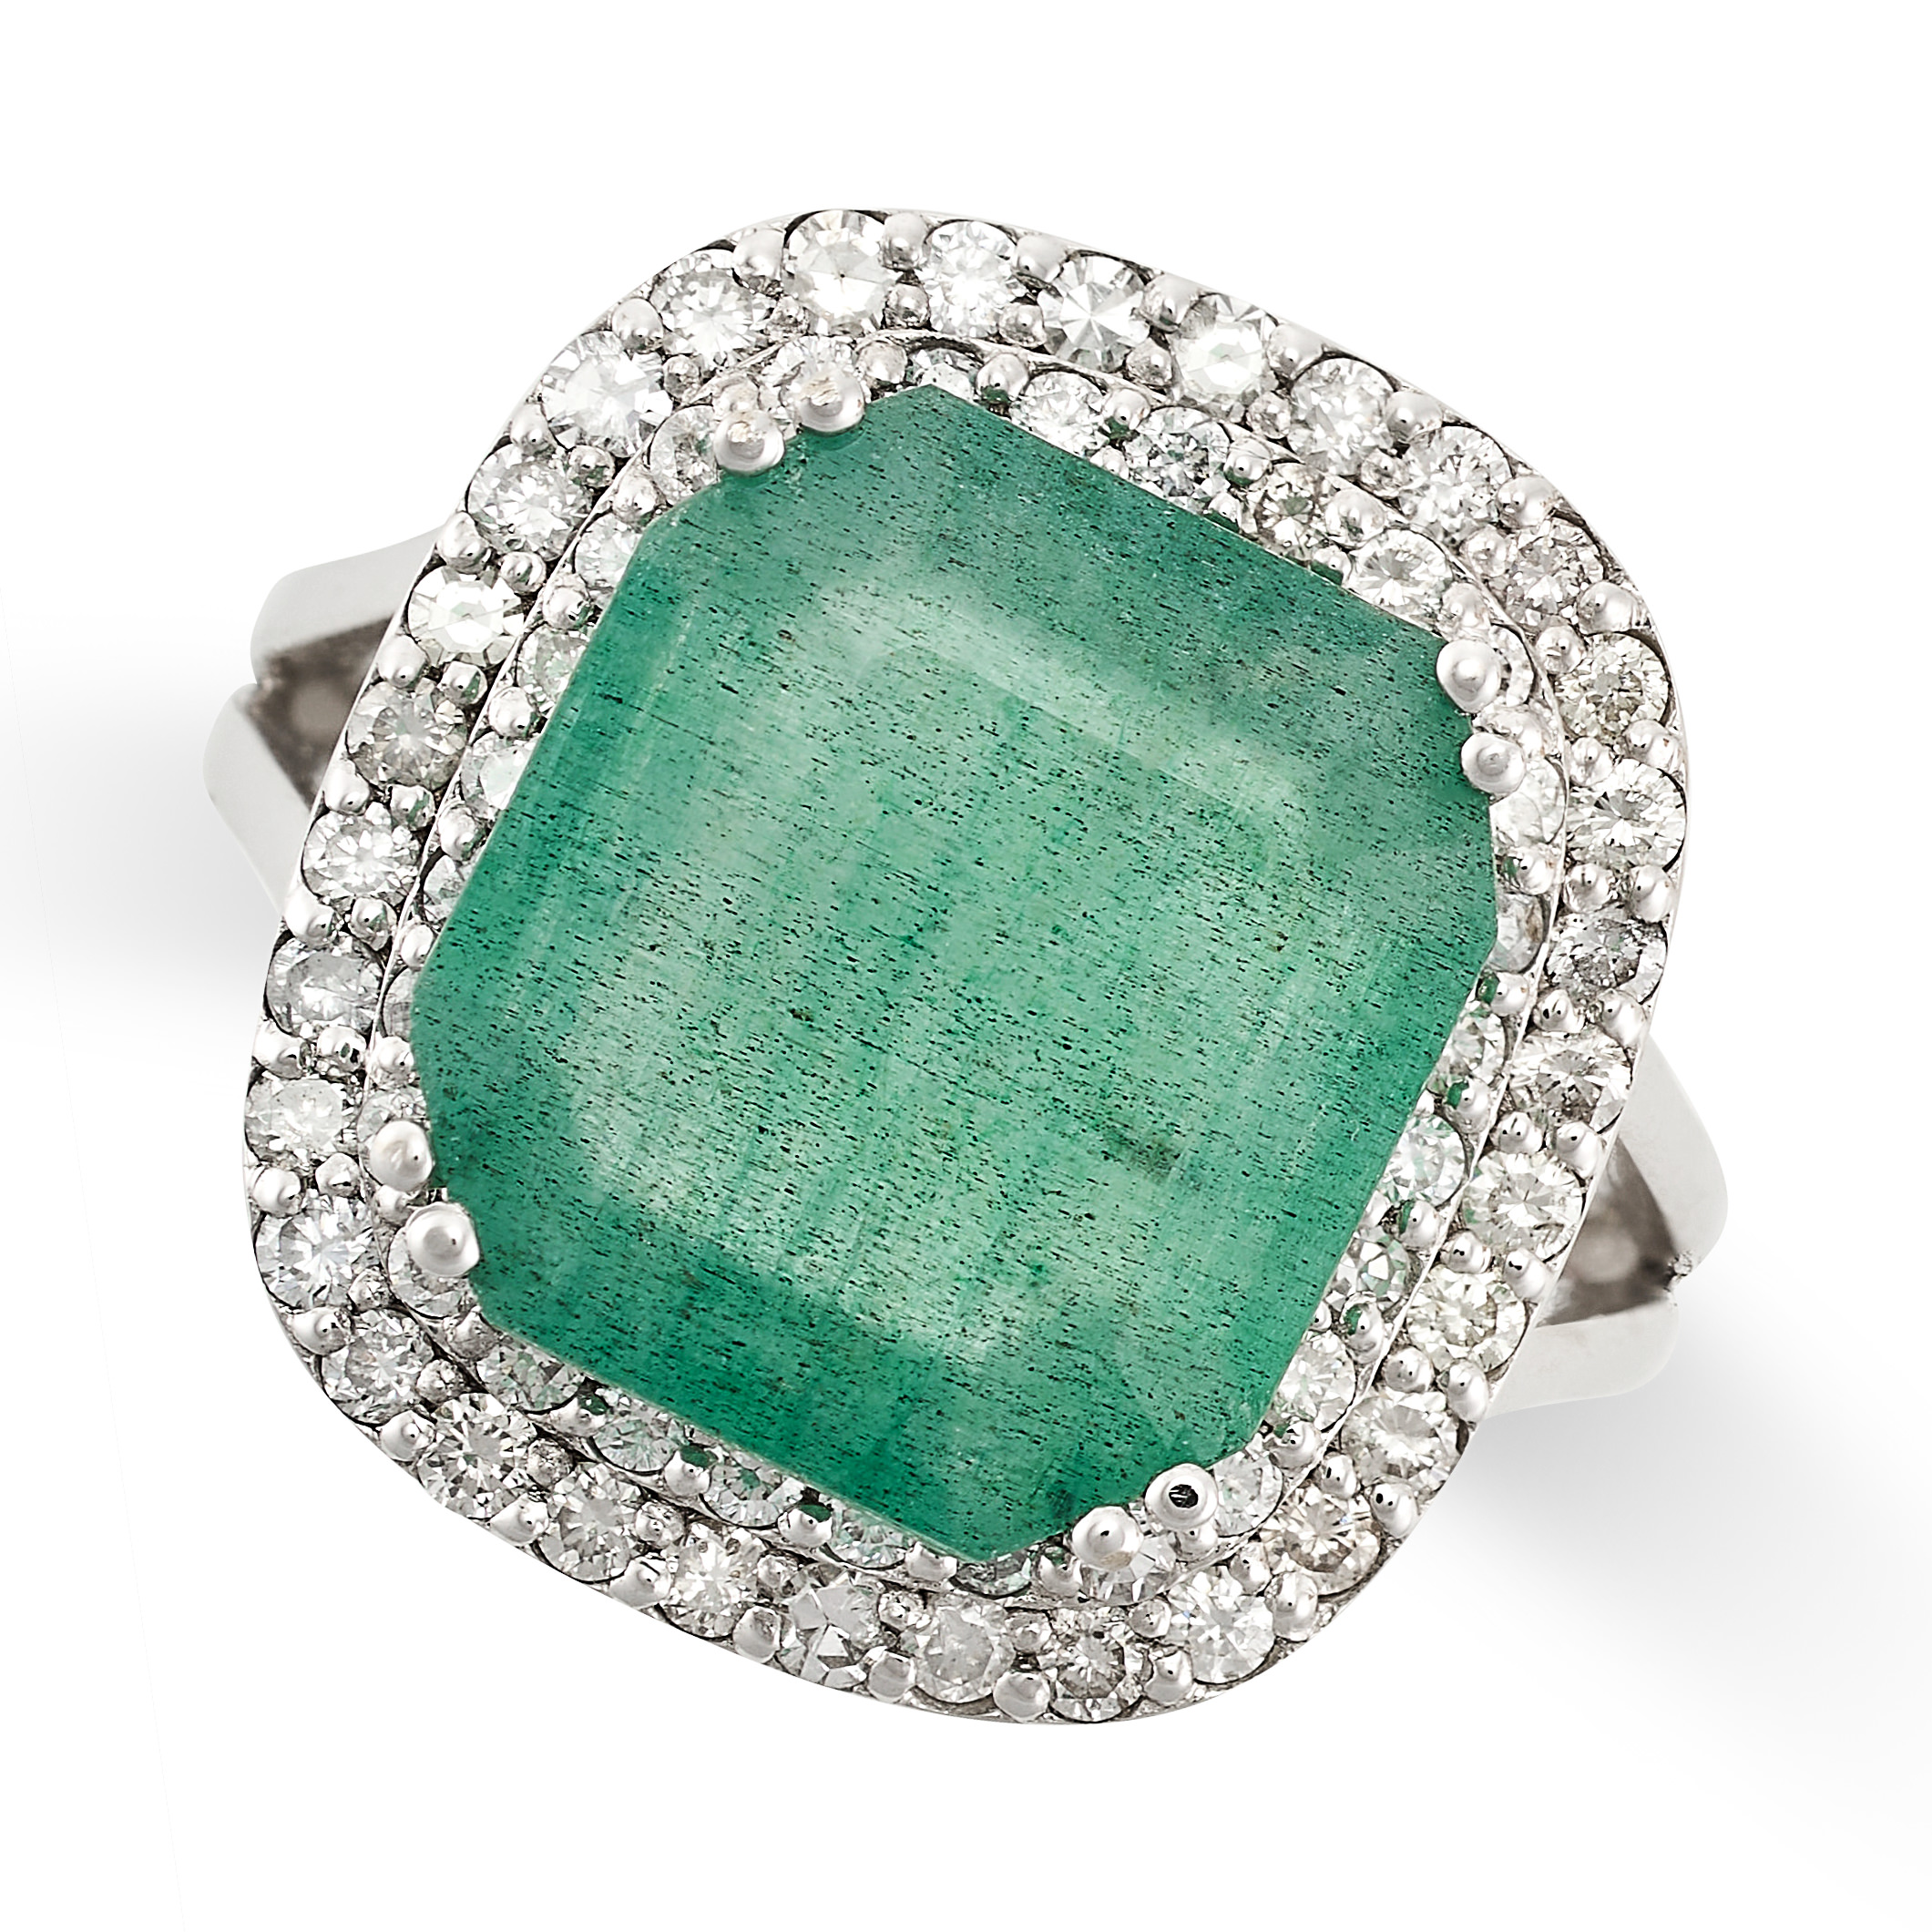 AN EMERALD AND DIAMOND RING set with an octagonal cut emerald, within a double border of round cut